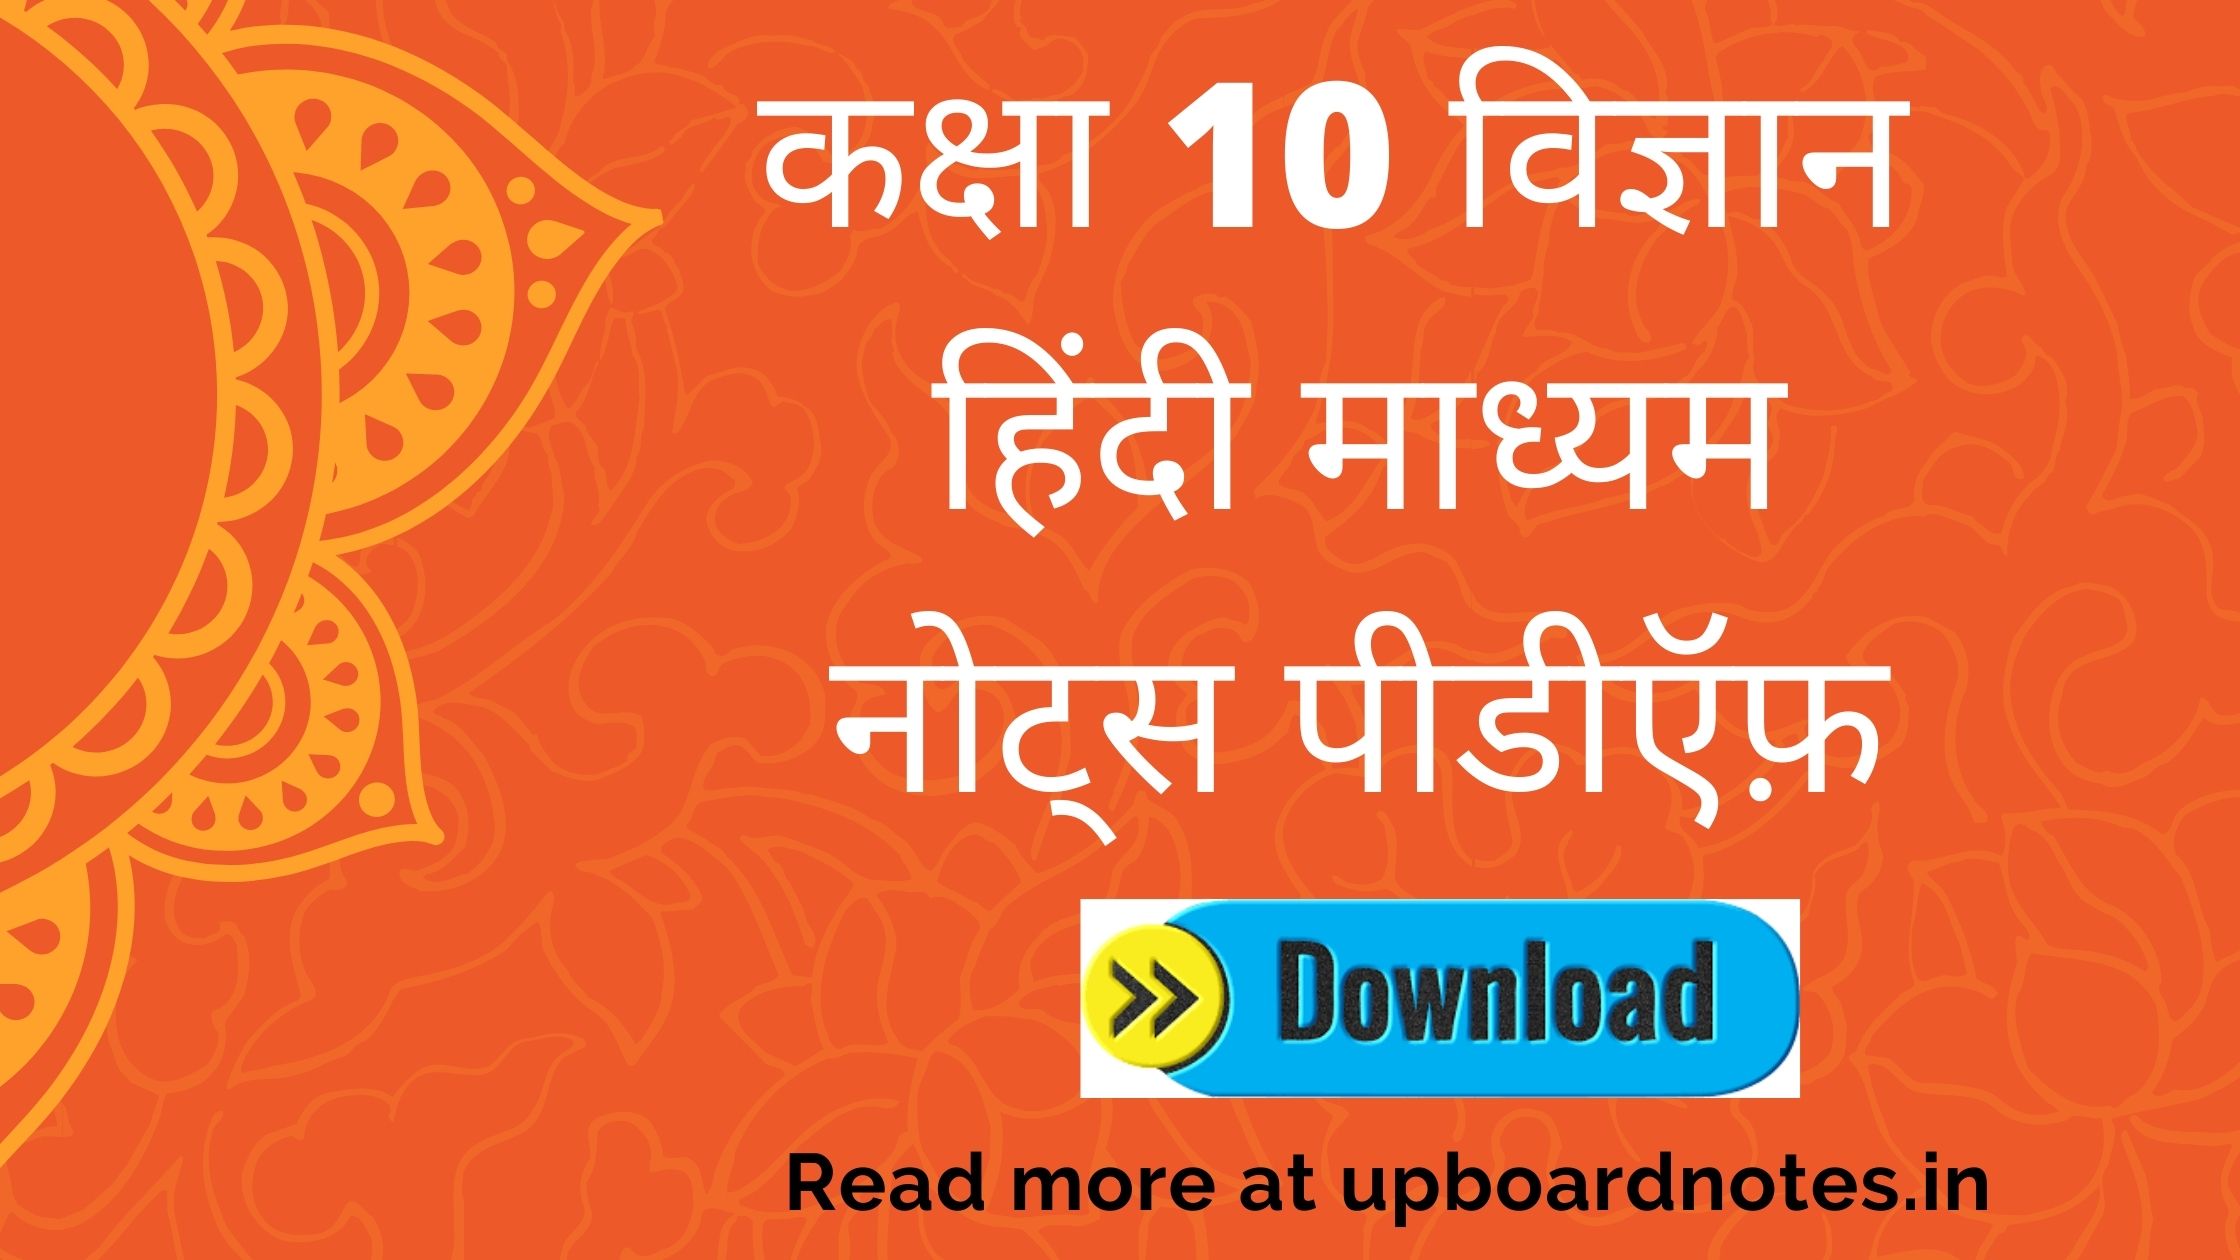 Class 10 Science Notes in Hindi : Class 10 Science Notes in Hindi Medium Pdf